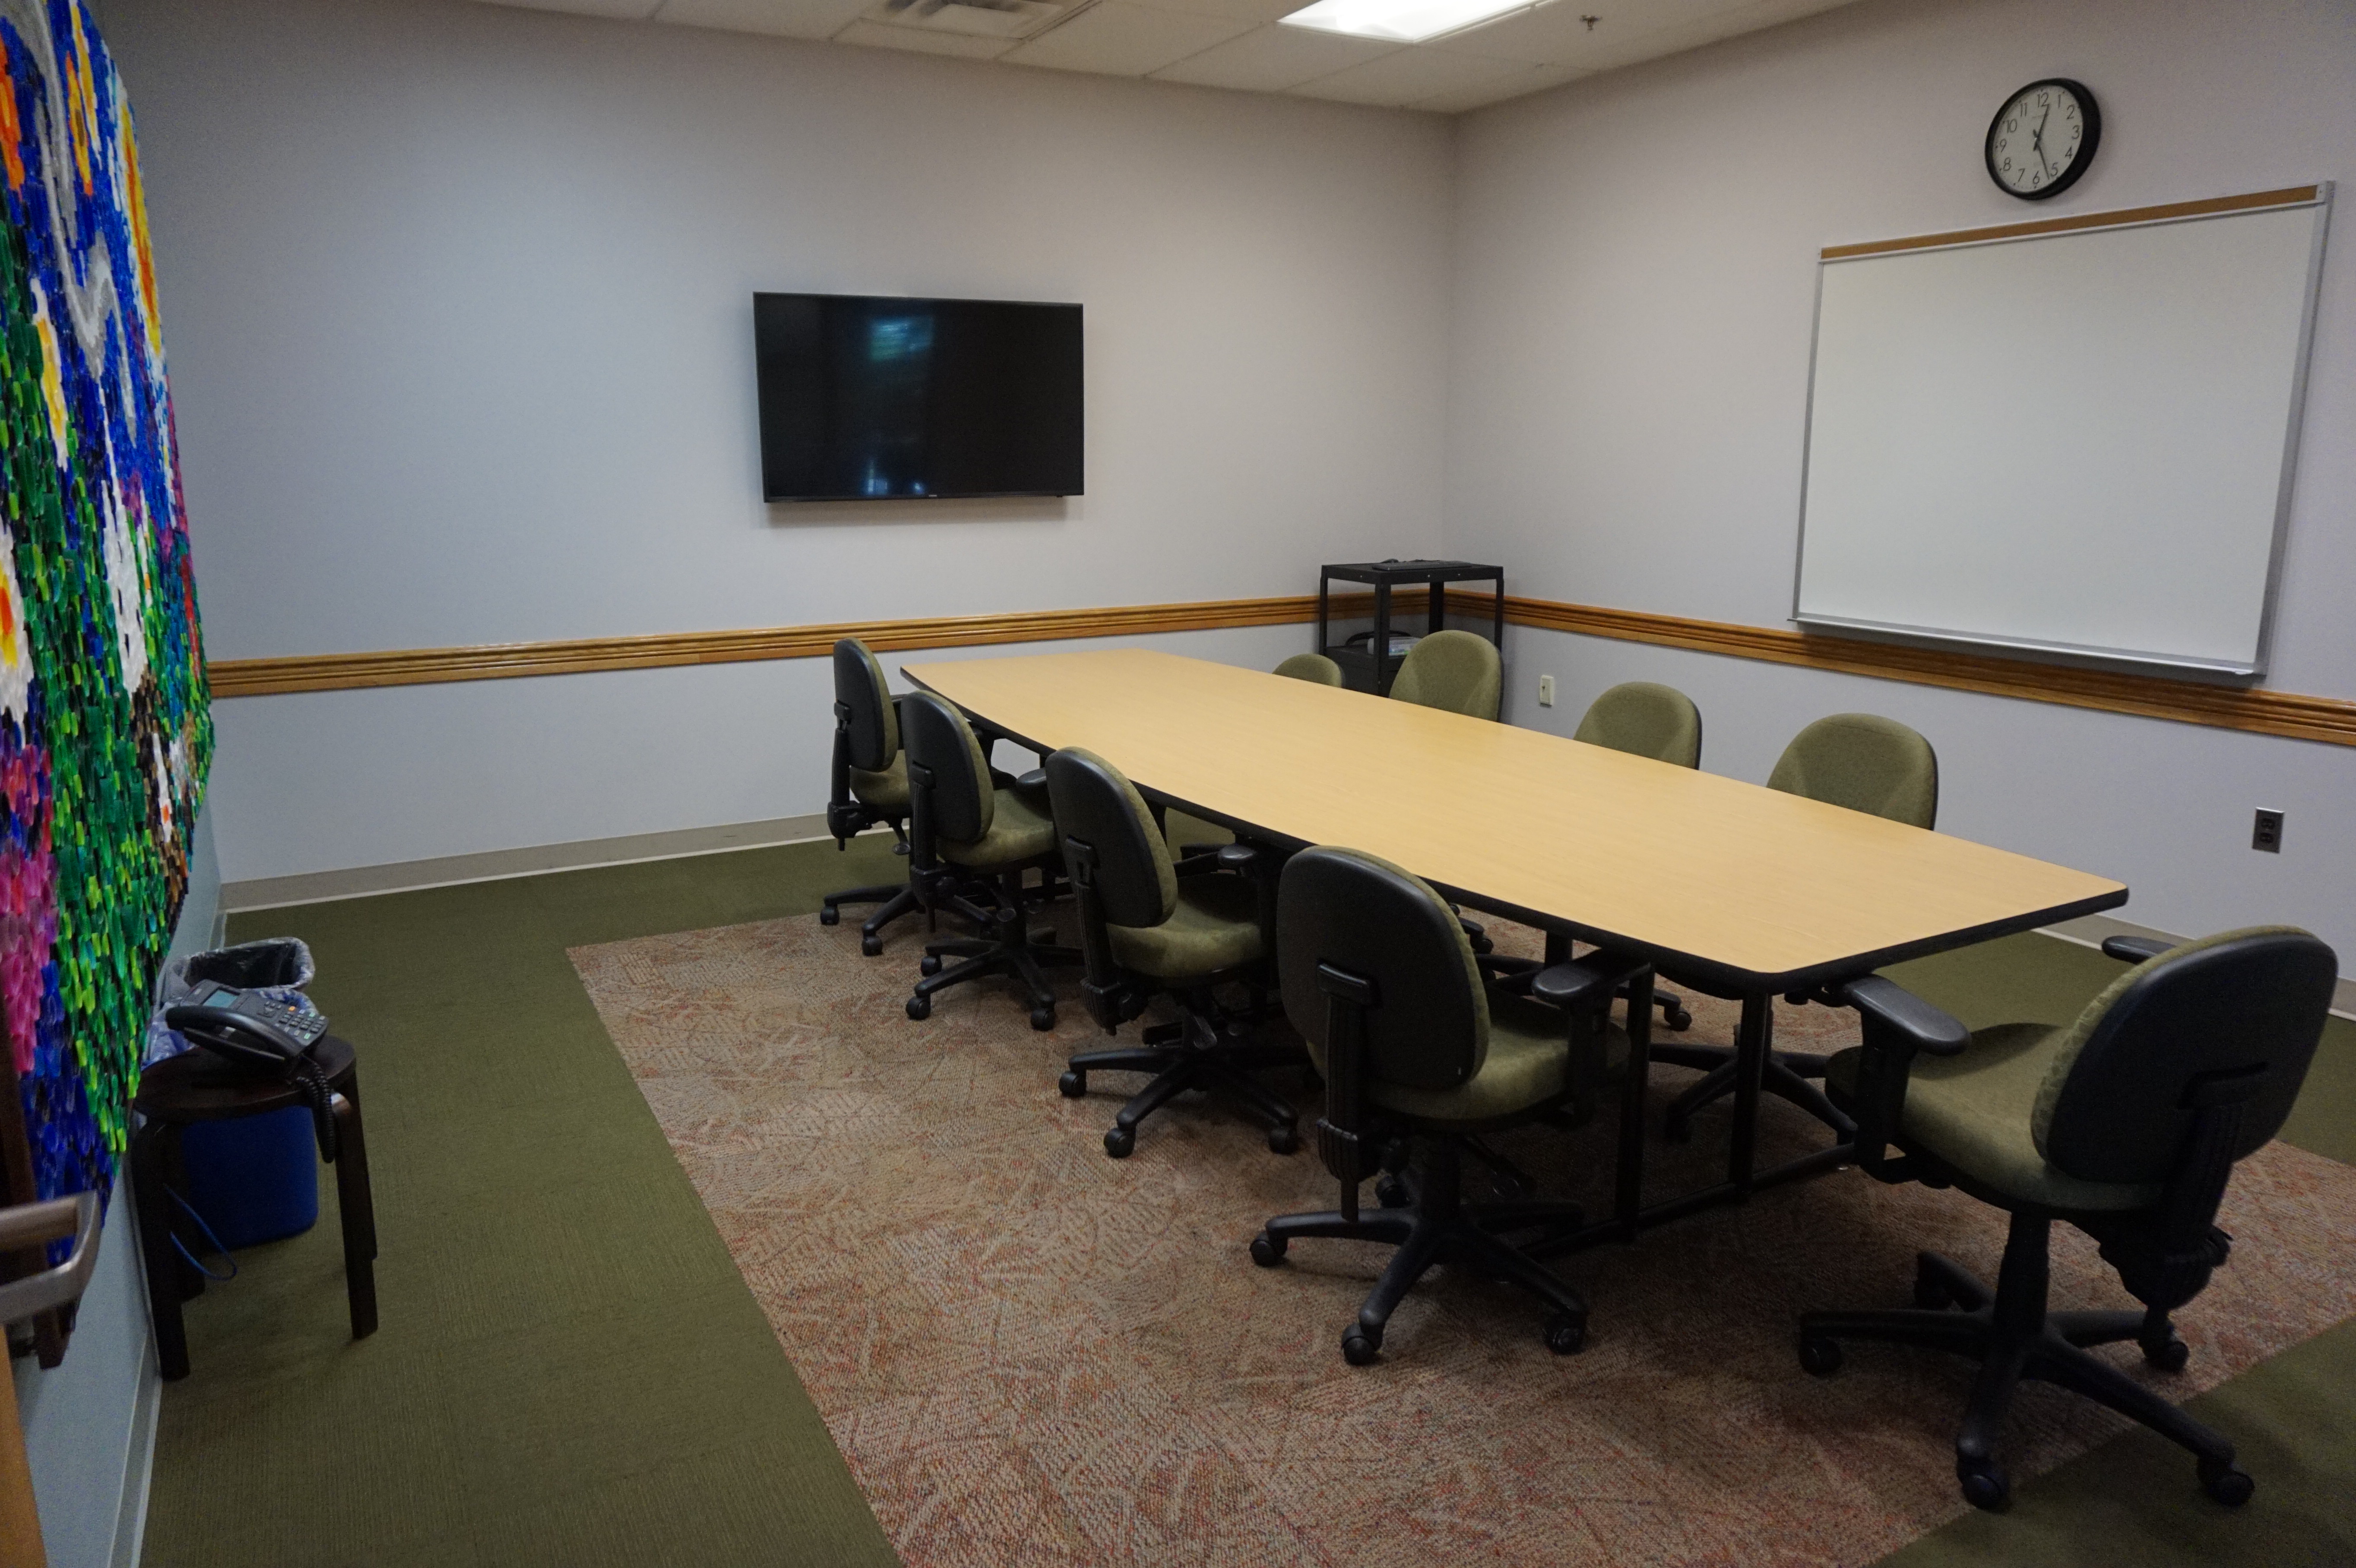 Finksburg small meeting room with a rectangular table and conference-style seating, television and white board mounted on wall